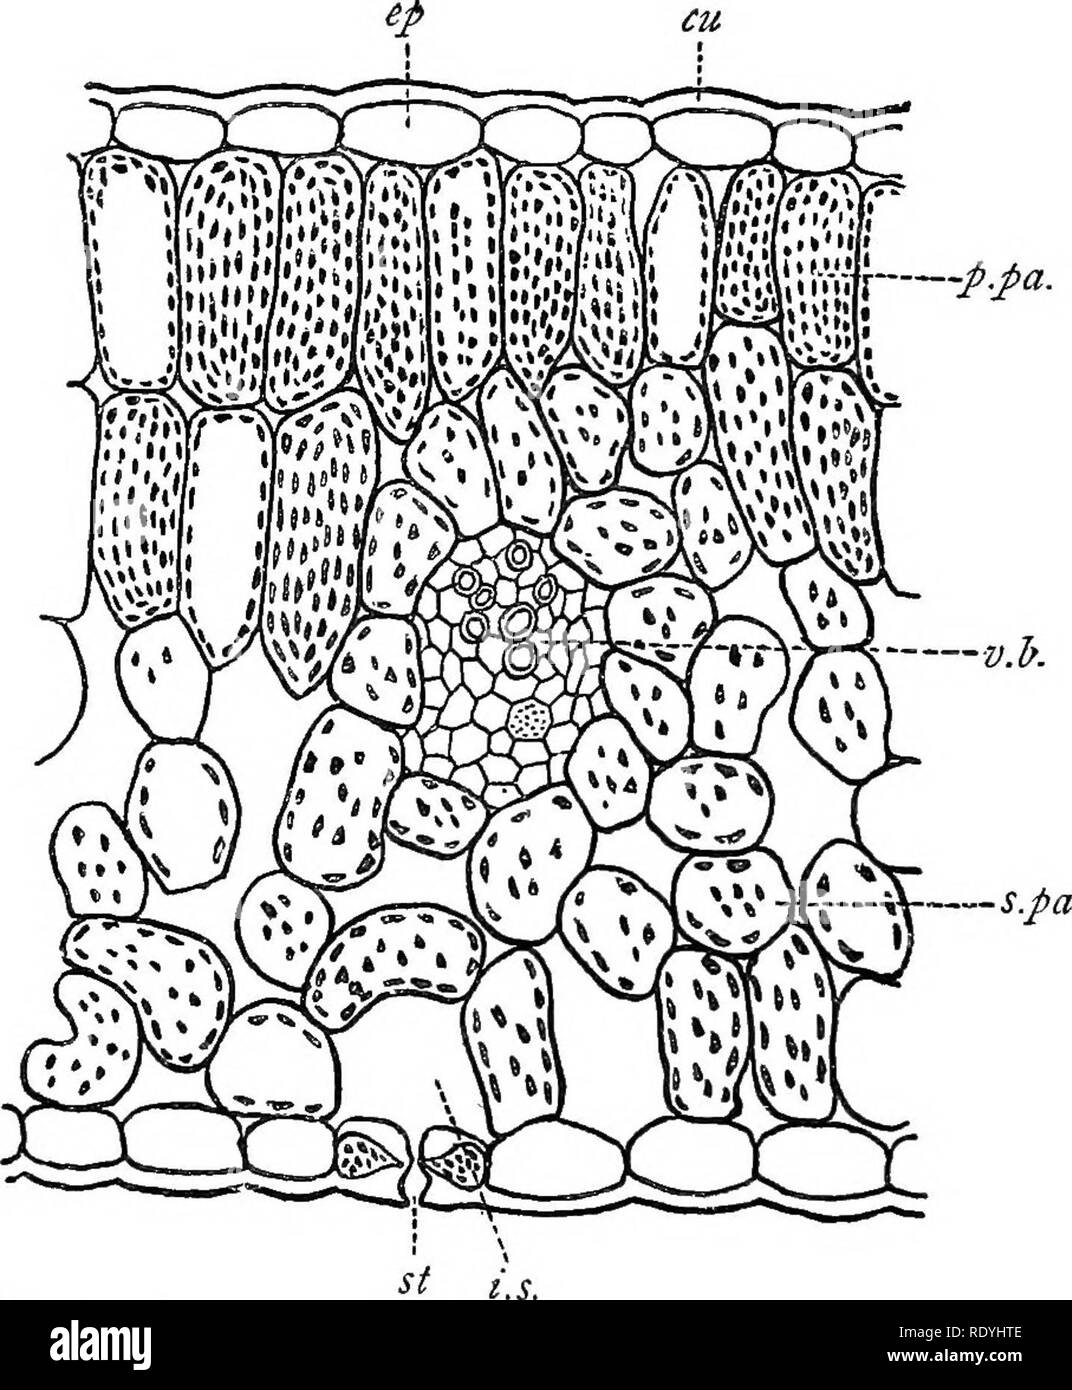 . An introduction to vegetable physiology. Plant physiology. 146 VEGETABLE PHYSIOLOGY are in the spongy tissue which occupies the lower half of the thickness of the leaf (fig. 86). The guard-cells of the stomata, however, always contain them. The green cortex of young stems and twigs also exhibits them. In such plants as the Casuarinas and the Equisetums (fig. 87), in —p.fa.. Fig. 86,-Teansvekse Section of portion of the Blade of the Leaf of Beta, cu, cuticle ; ep, epidermis; p.pa, palisade tissue ; s.pa, spongy tissue • v.b, vascular bundle ; st, stoma; i.s, intercellular space ' which the le Stock Photo